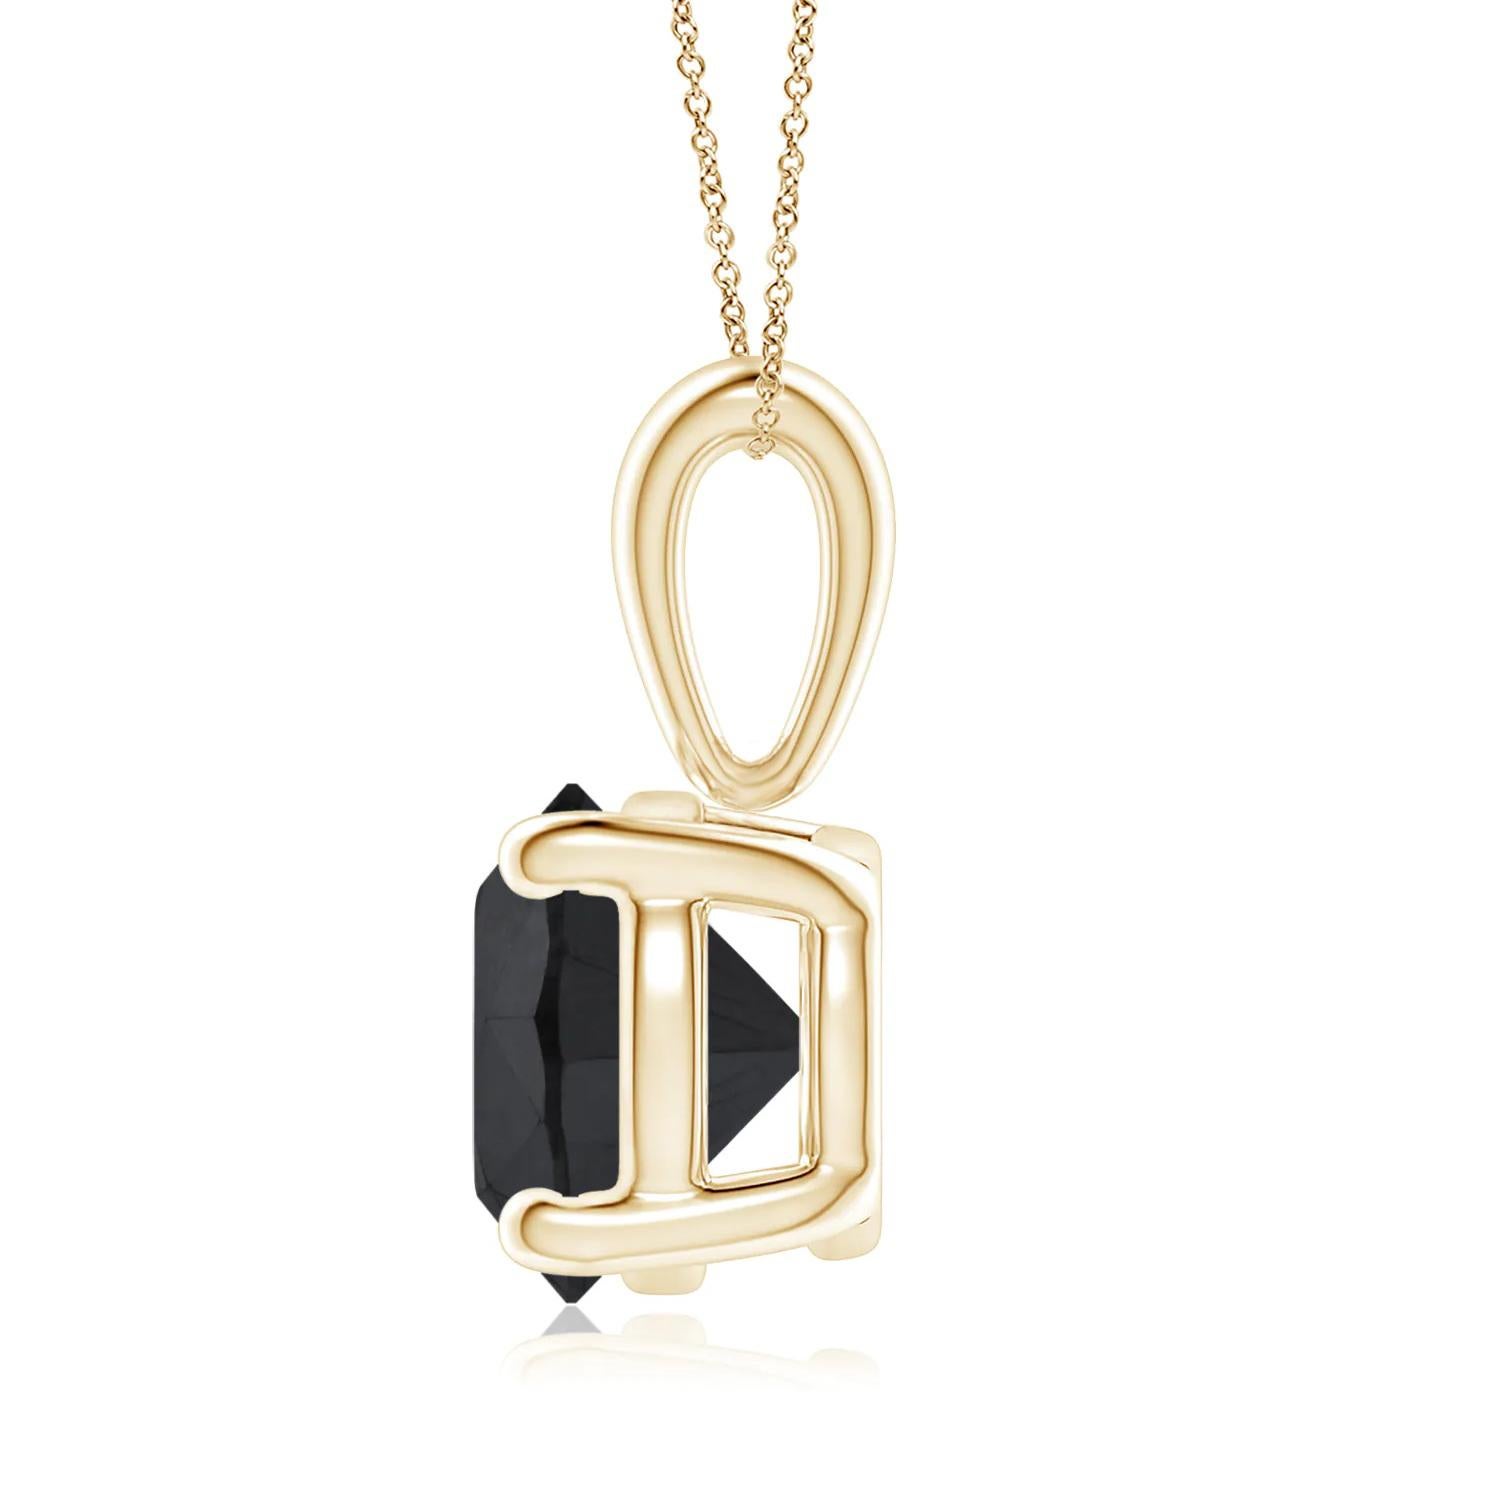 Surprise a special woman in your life with this breathtaking, statement hand crafted solitaire black diamond necklace. This eye-catching pendant necklace features a 3.15 carat round cut black diamond, measuring 8.51 x 8.55 x 6.70 mm set in 14k